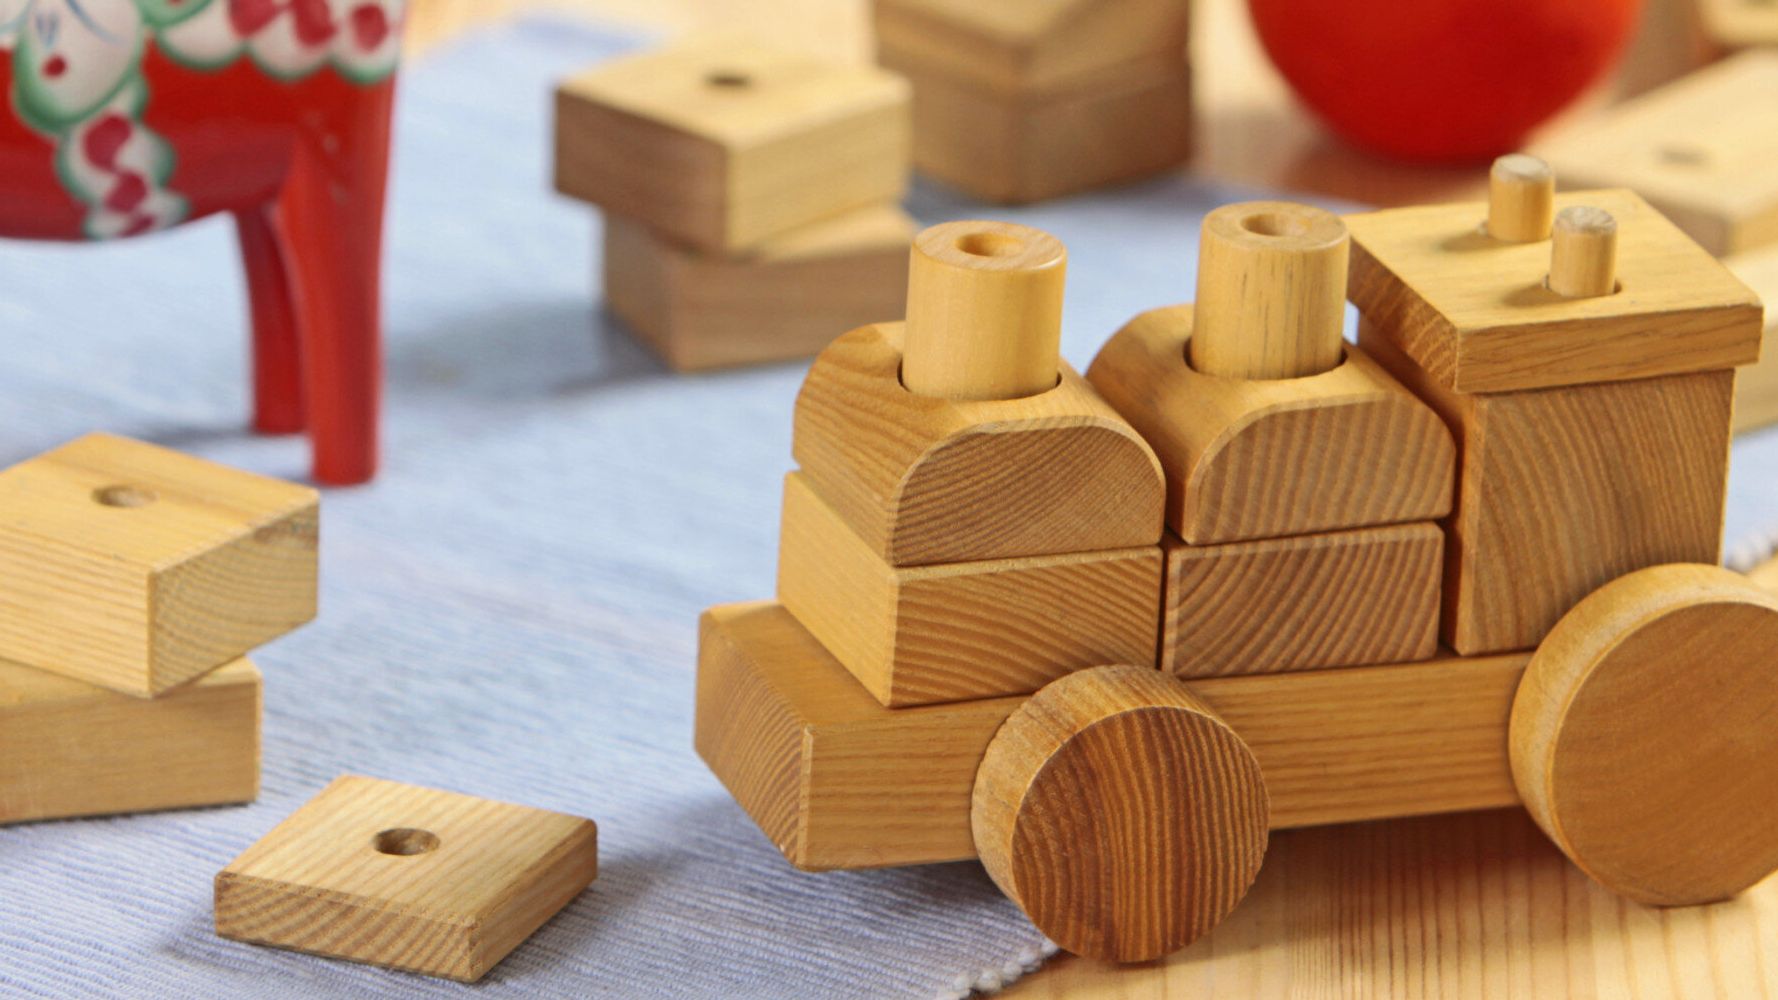 Seven Reasons You Want To Buy More Wooden Toys For Your Children